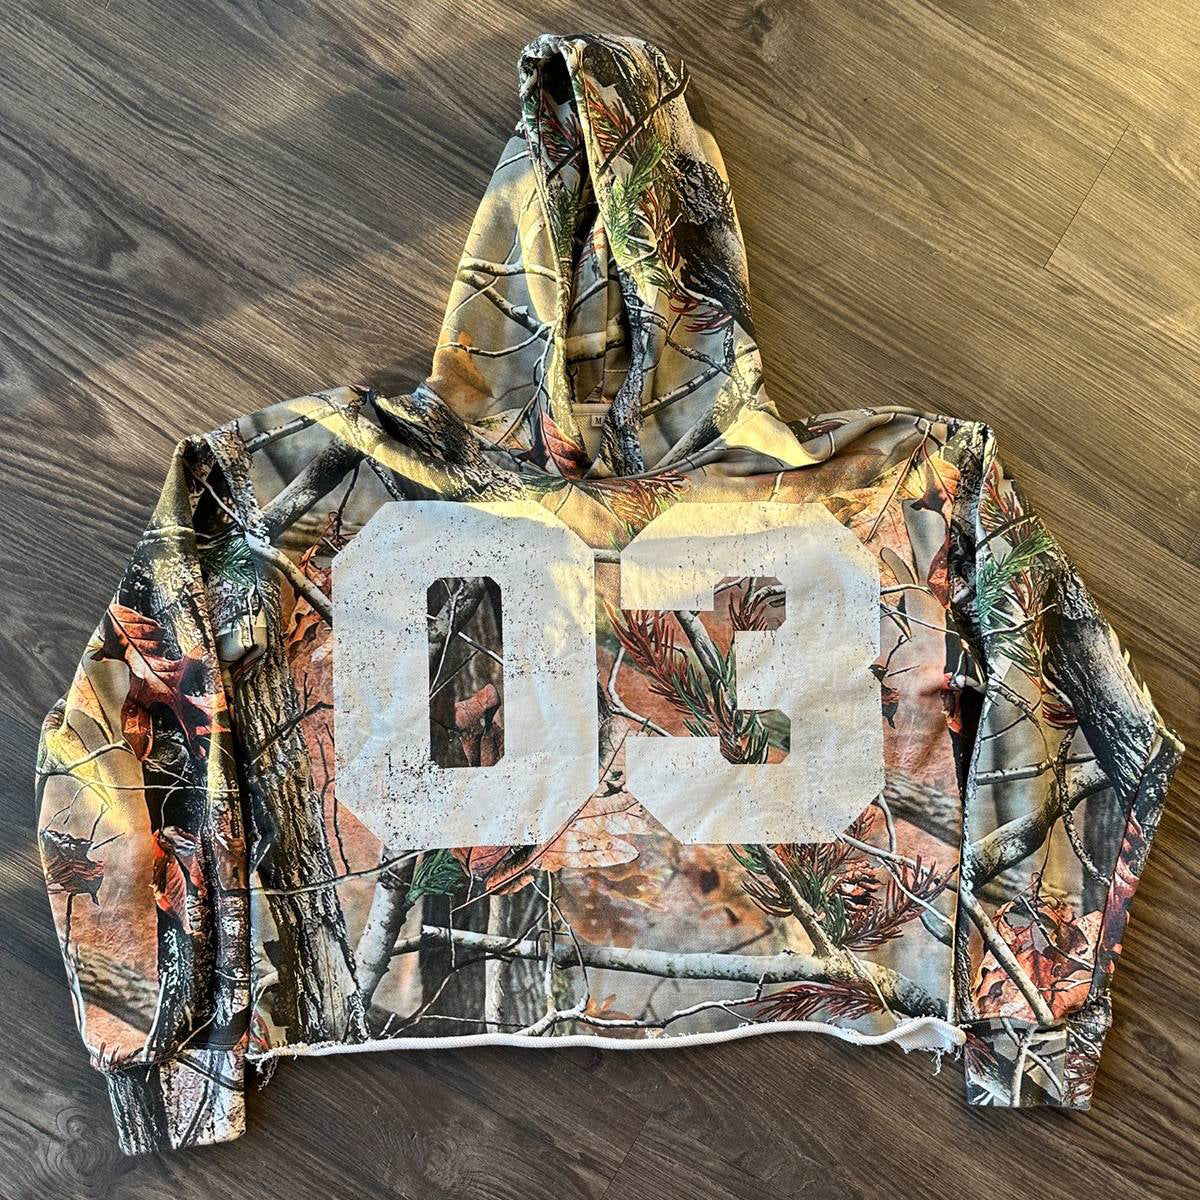 Limited sale of casual street camouflage trendy printed cotton hoodie